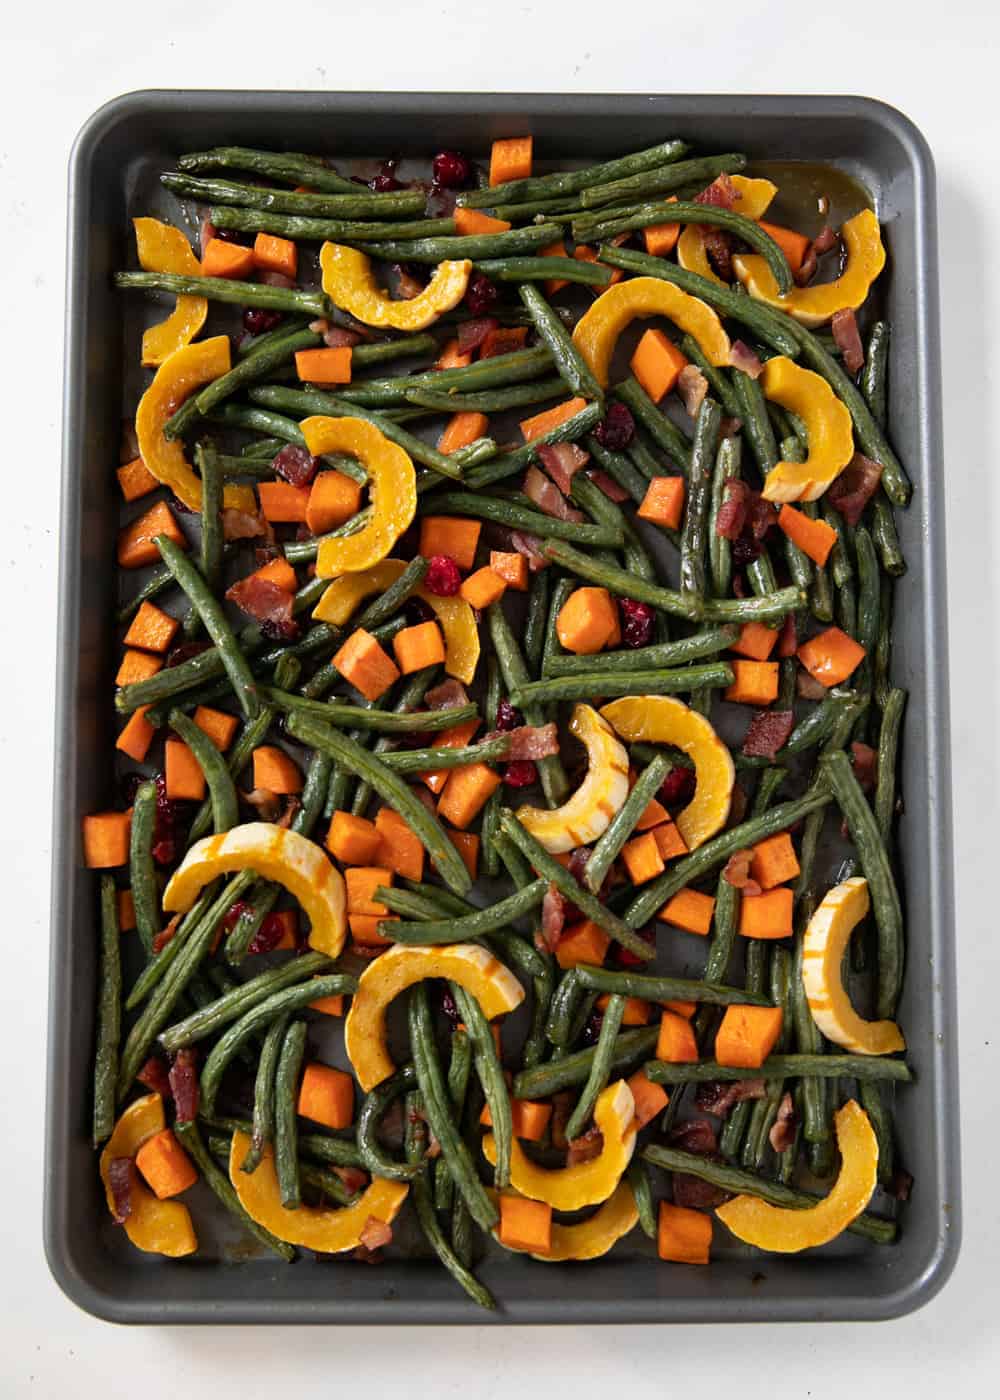 Roasted vegetables on the pan.